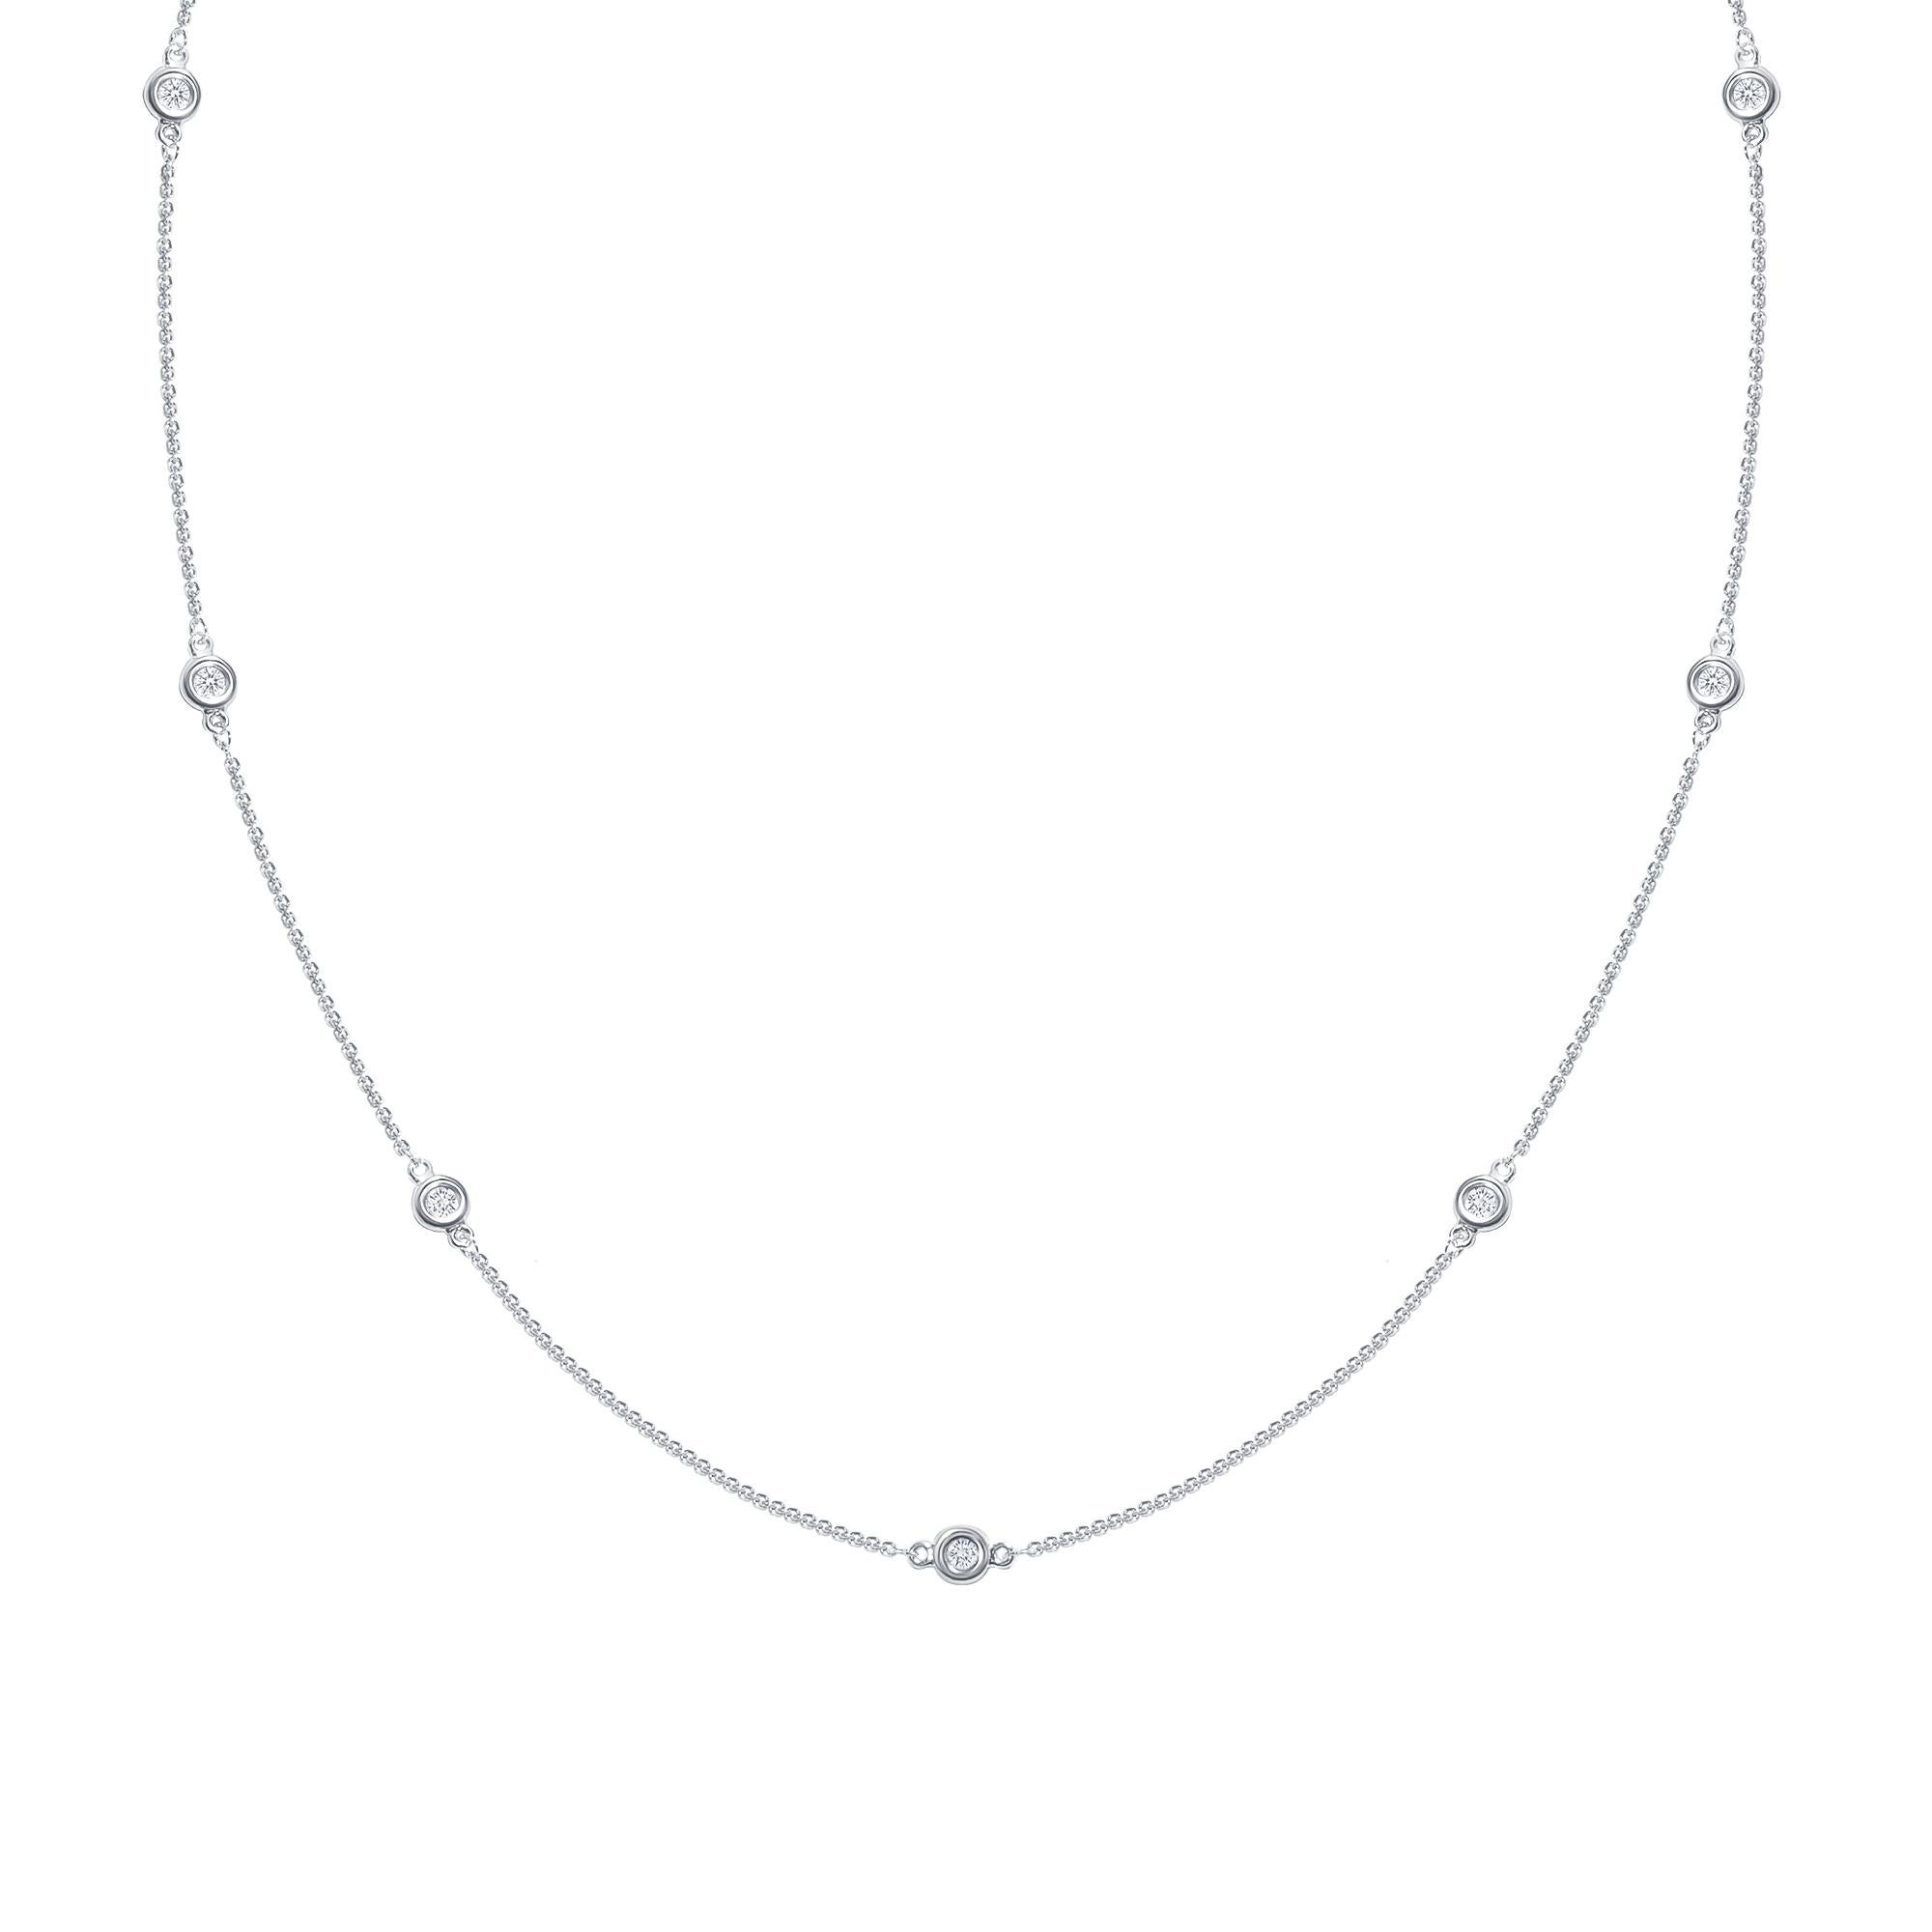 Eight elegant round diamonds set in a bezel setting along a 14k gold chain necklace.

Gold: 14K Gold
Number of Diamonds: Eight
Gold Color: White Gold
Carat: 0.50 Carats
Necklace Length: 20 Inches
Diamond Clarity: VS
Diamond Color: F
Chain Type: